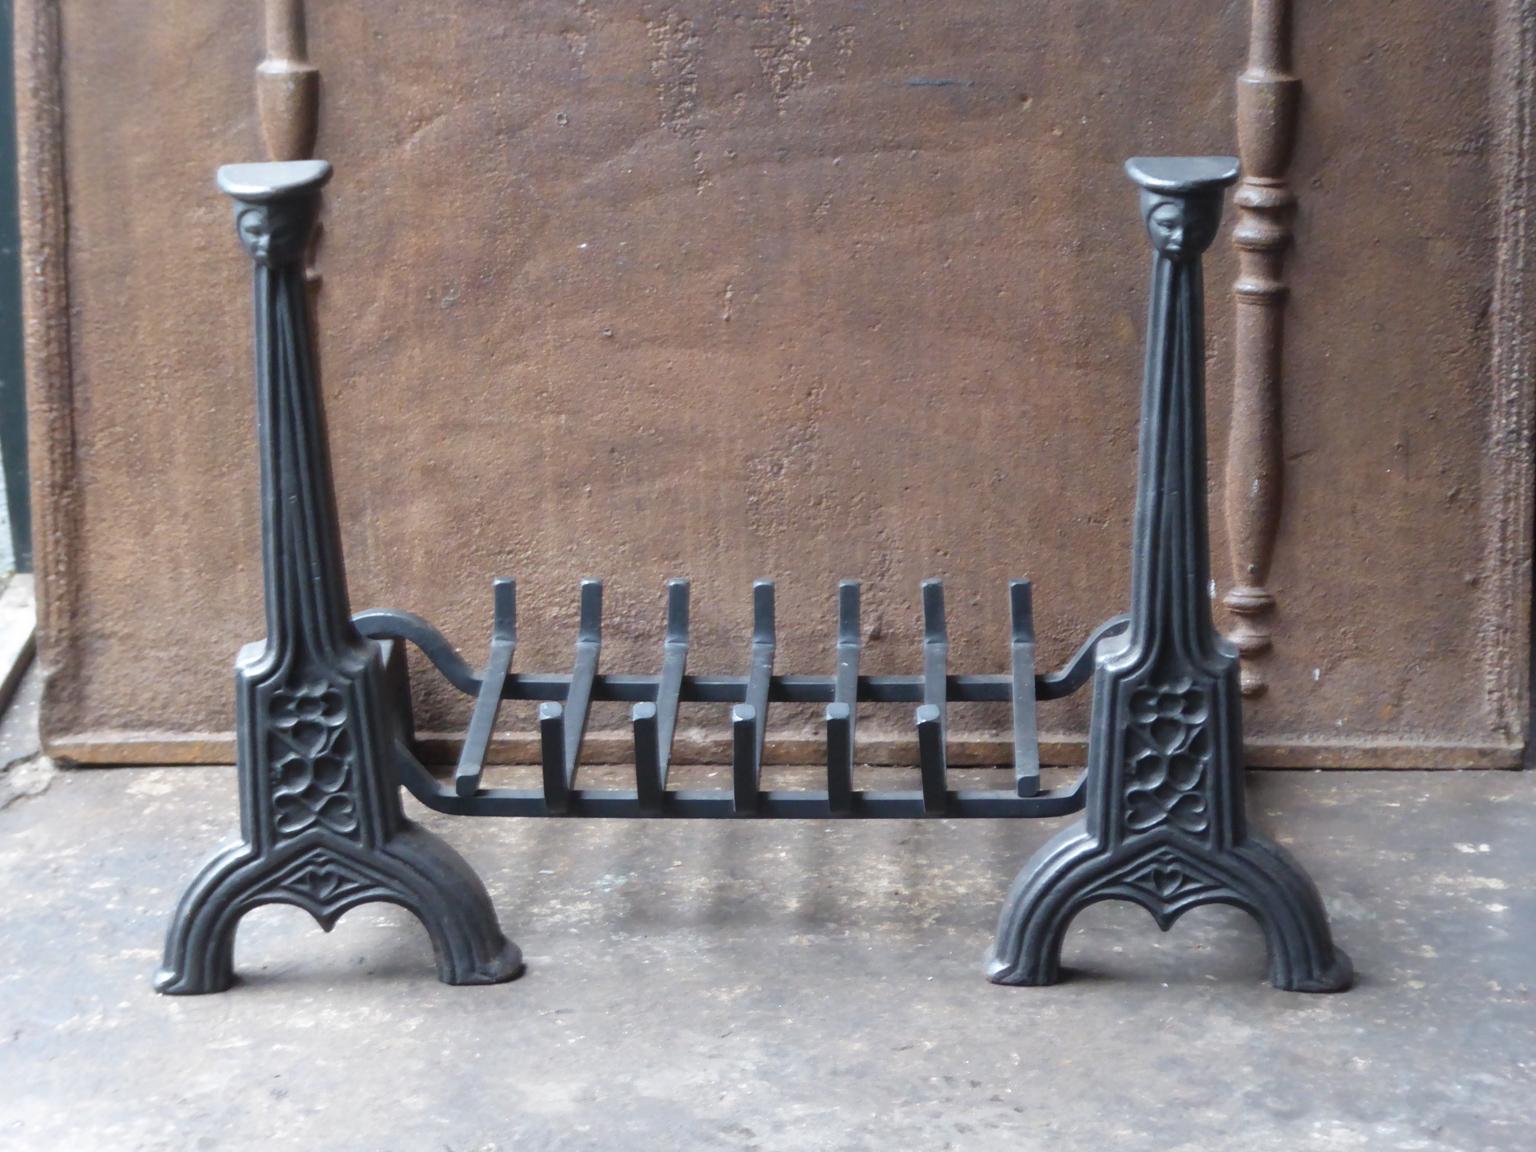 English neo gothic fireplace style basket or fire basket. The fireplace grate is made of cast iron. The total width of the front of the fireplace grate is 32 inch (81 cm).

















   